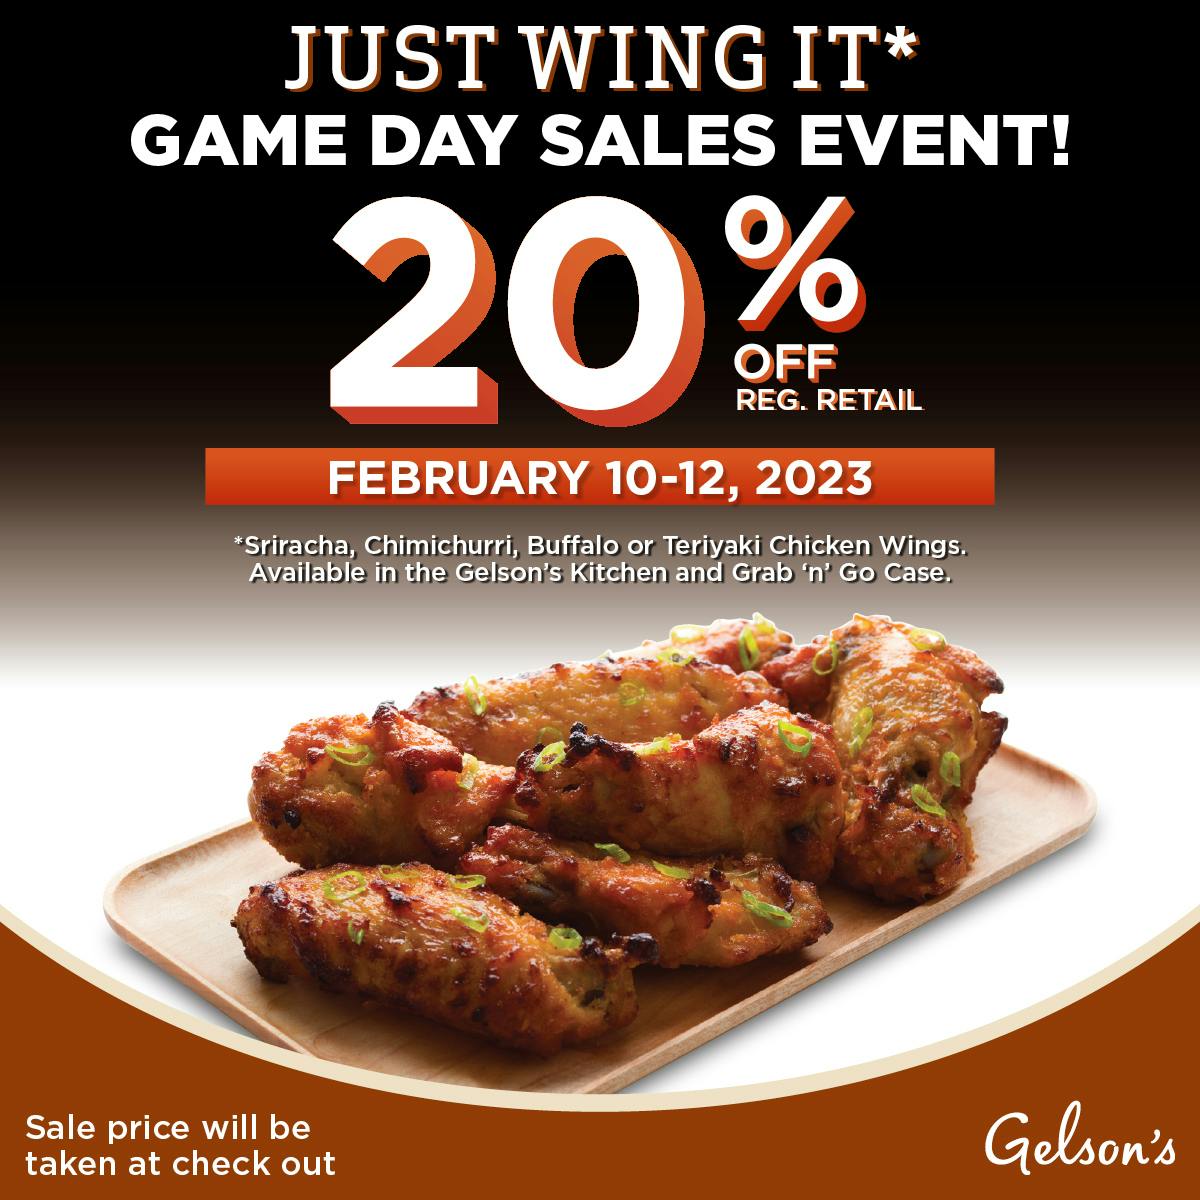 Just Wing It* Game Day Sales Event! 20% off reg retail. February 10-12, 2023. *Sriracha, Chimichurri, Buffalo or Teriyaki Chicken Wings. Available in the Gelson's Kitchen and Grab 'n' Go case.